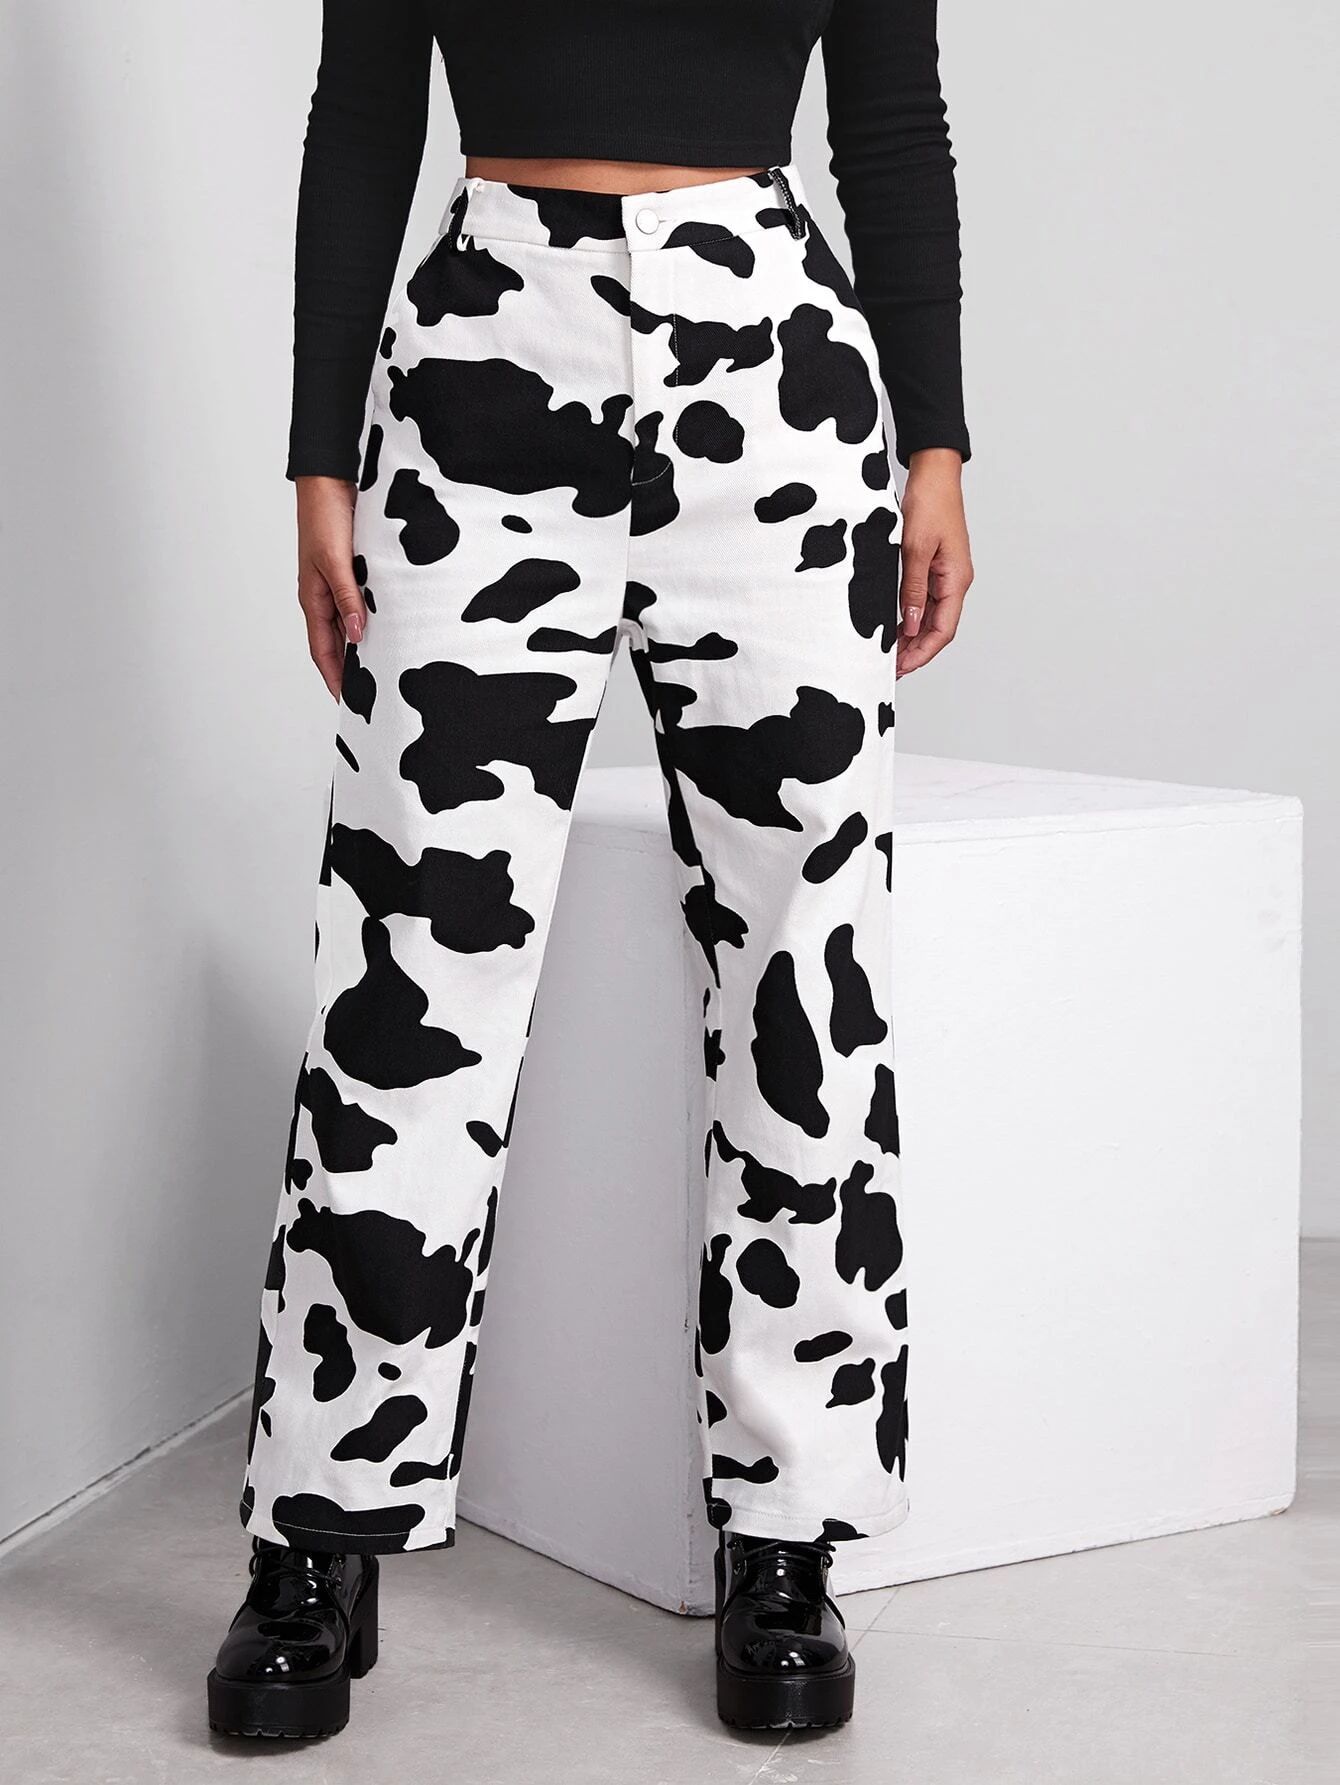 SHEIN EZwear Buttoned Front Cow Print Pants | SHEIN